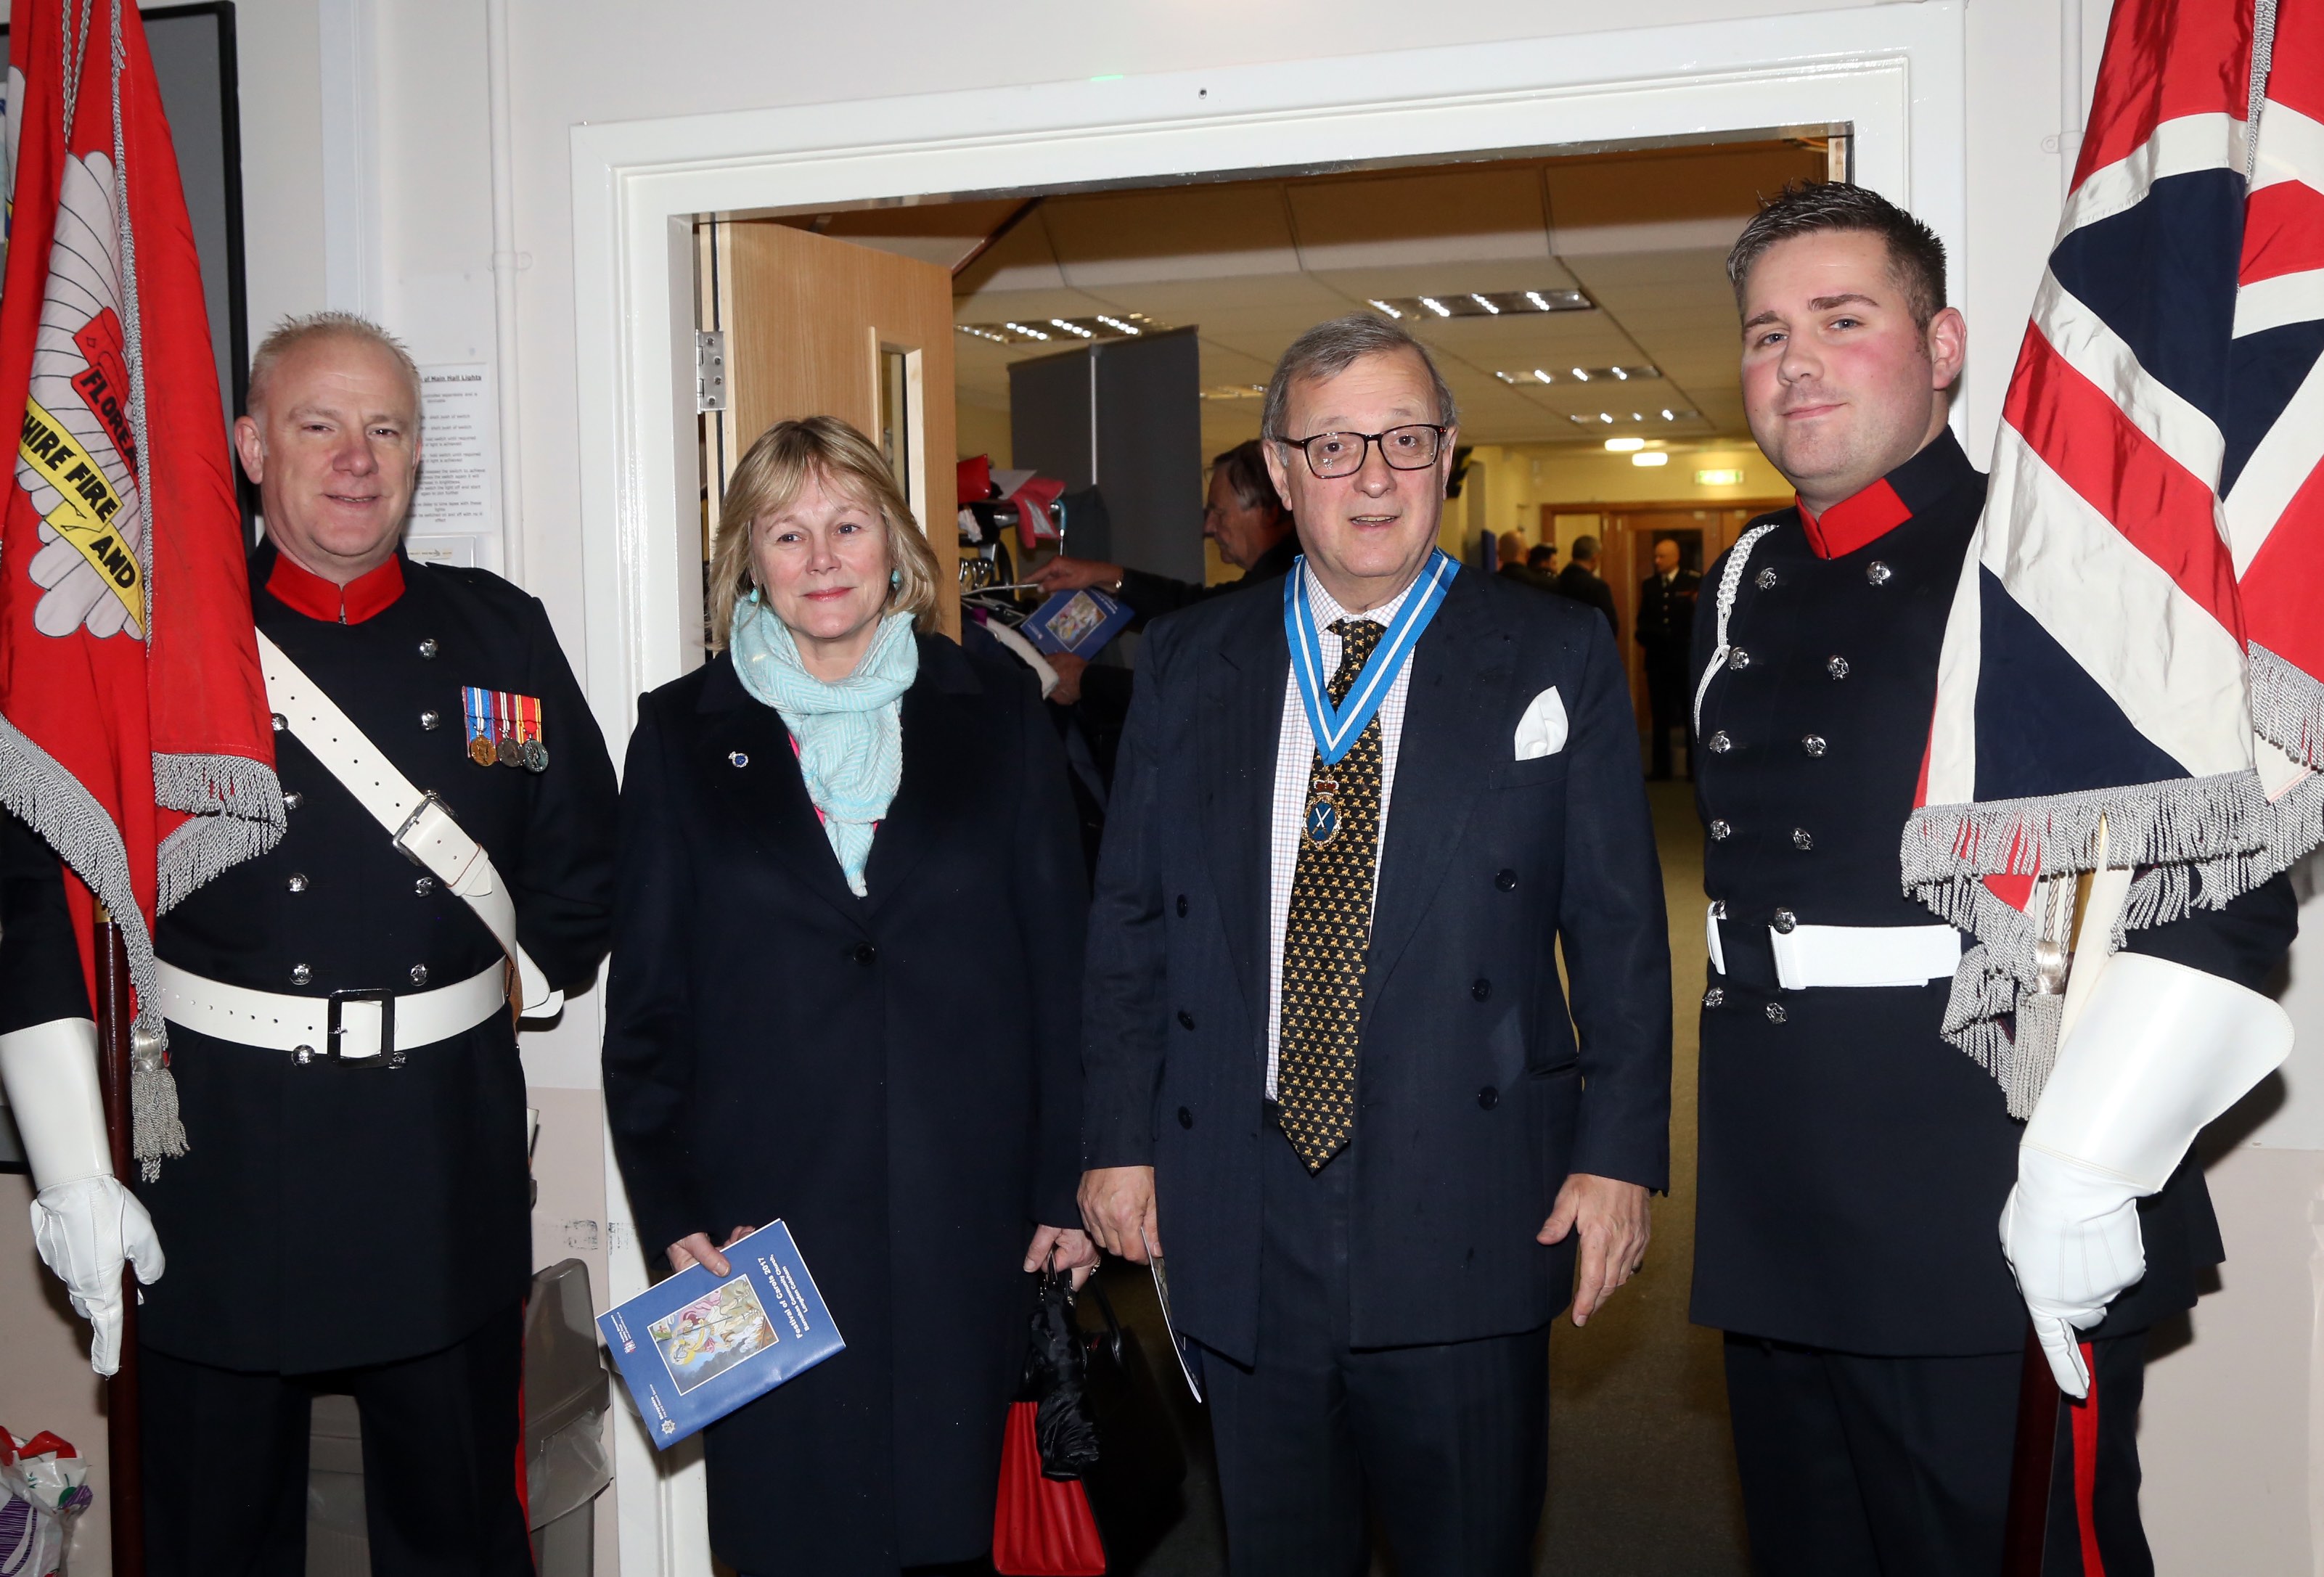 Shropshire High Sheriff and his wife are welcomed to Shropshire Fire and Rescue Service's Festival of Carols